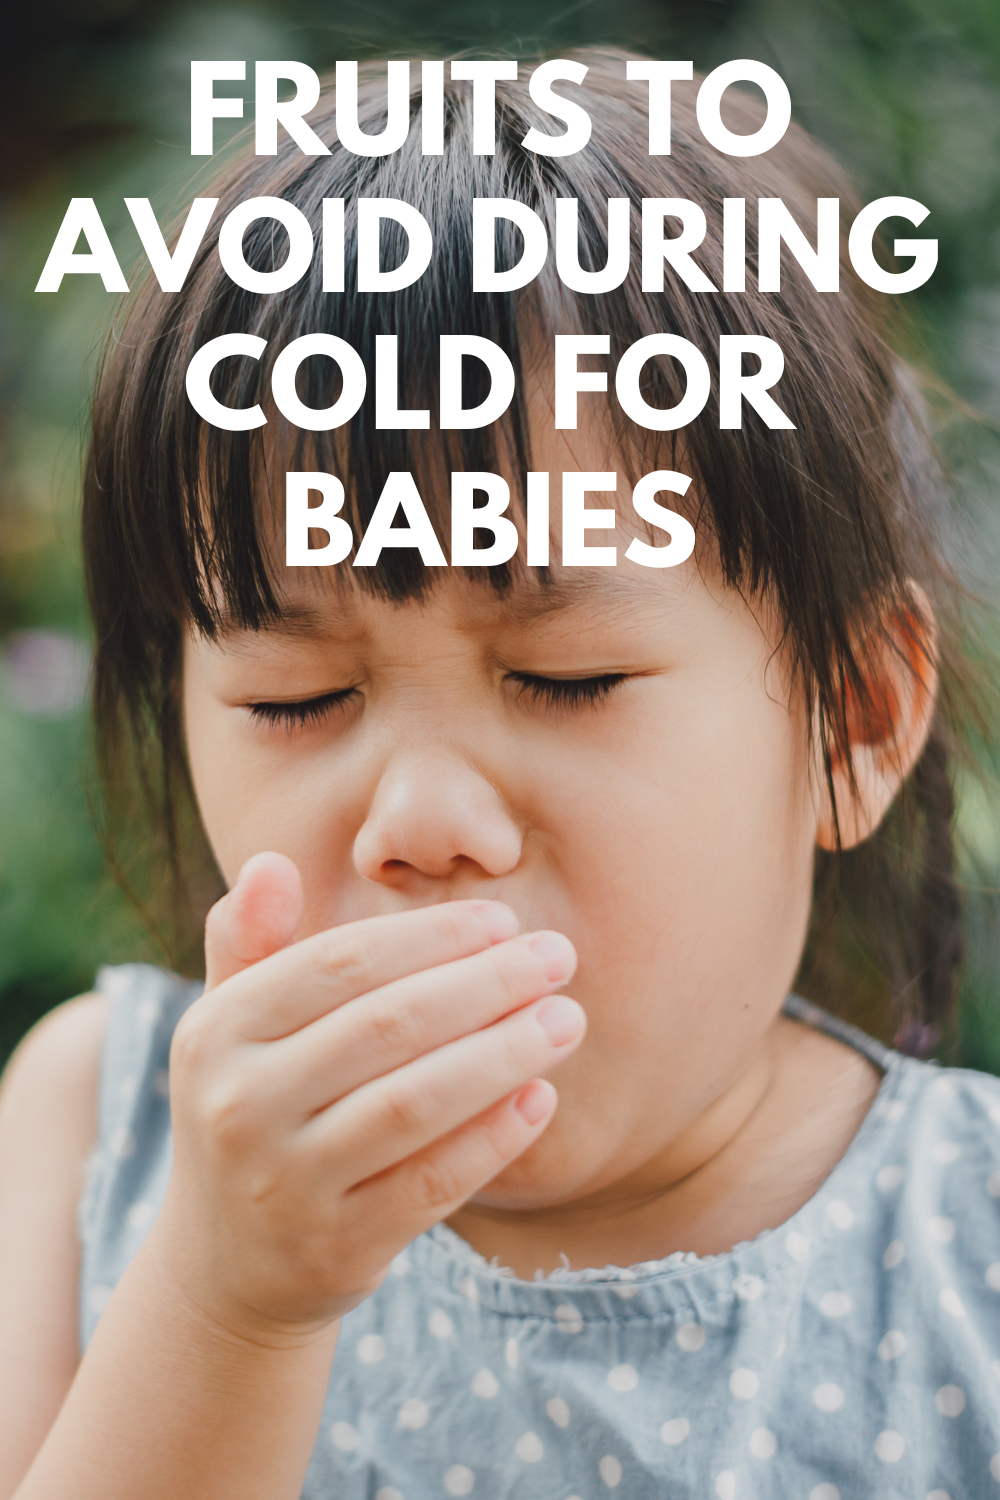 Fruits To Avoid During Cold For Babies